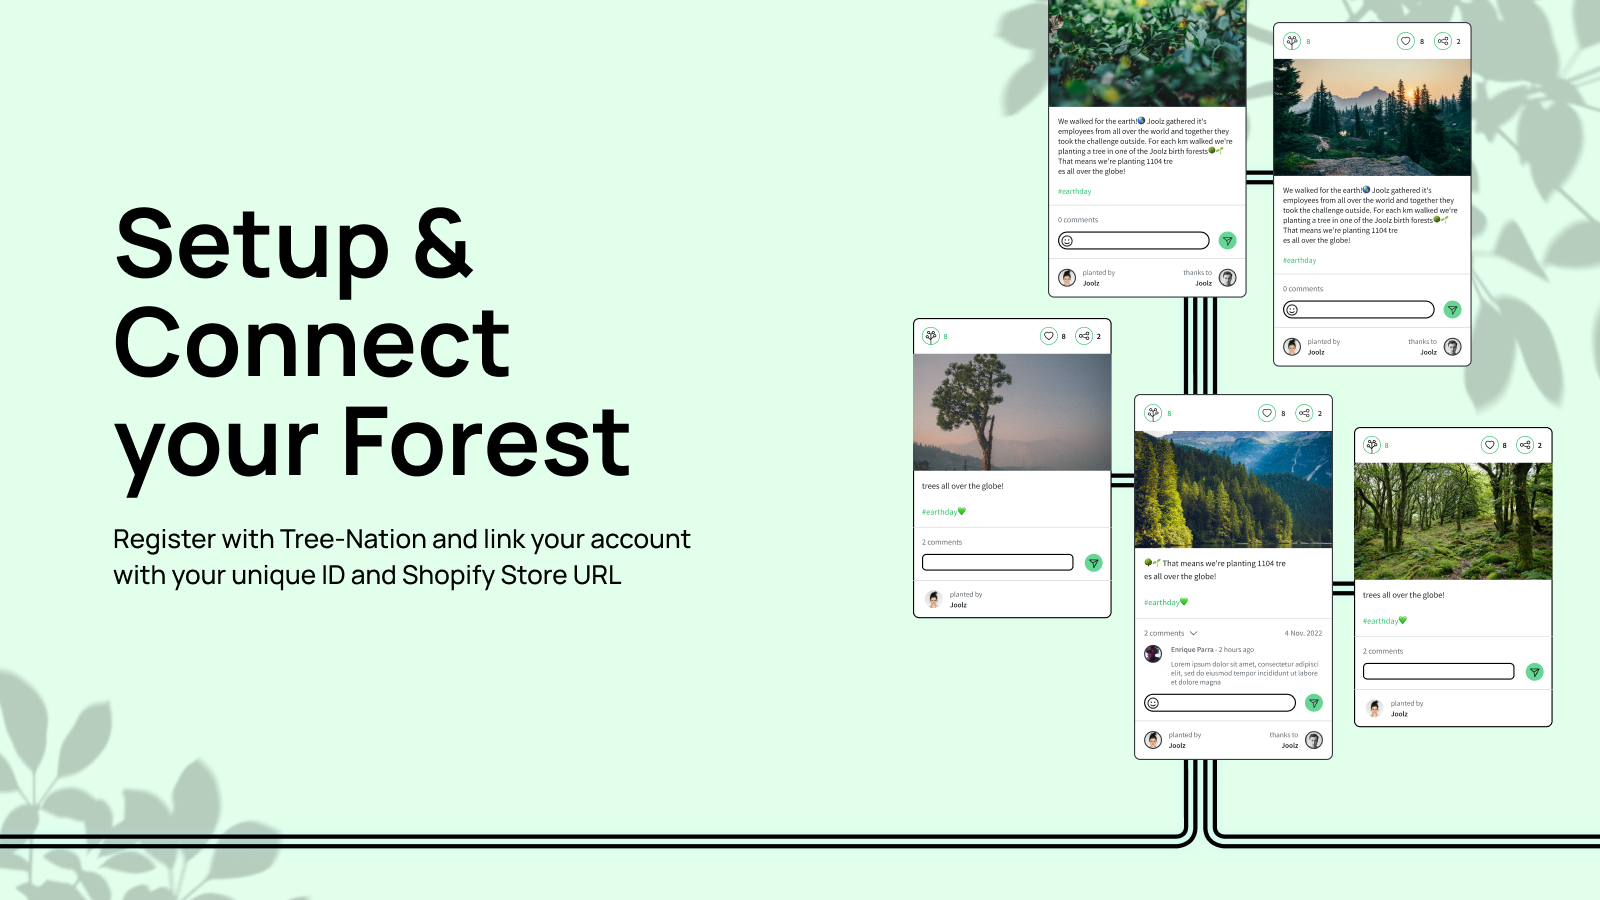 Setup and connect your forest